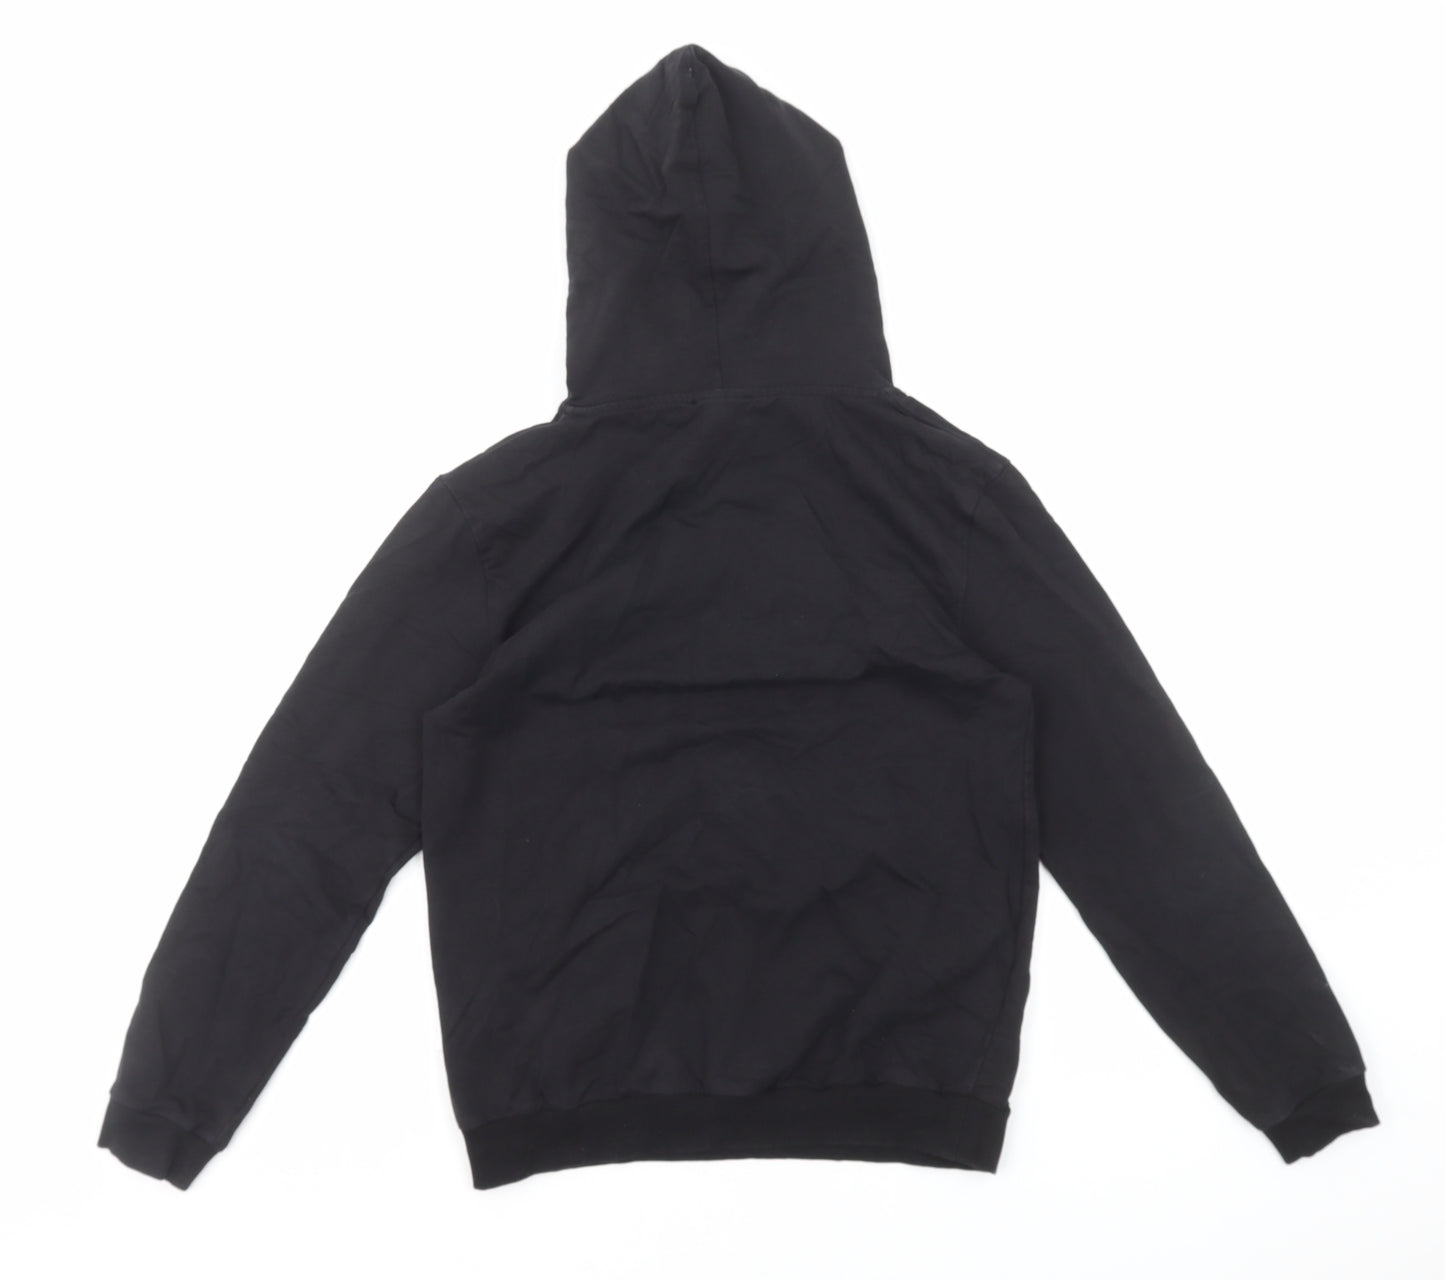 Sometime Soon Boys Black Cotton Pullover Hoodie Size 10 Years Pullover